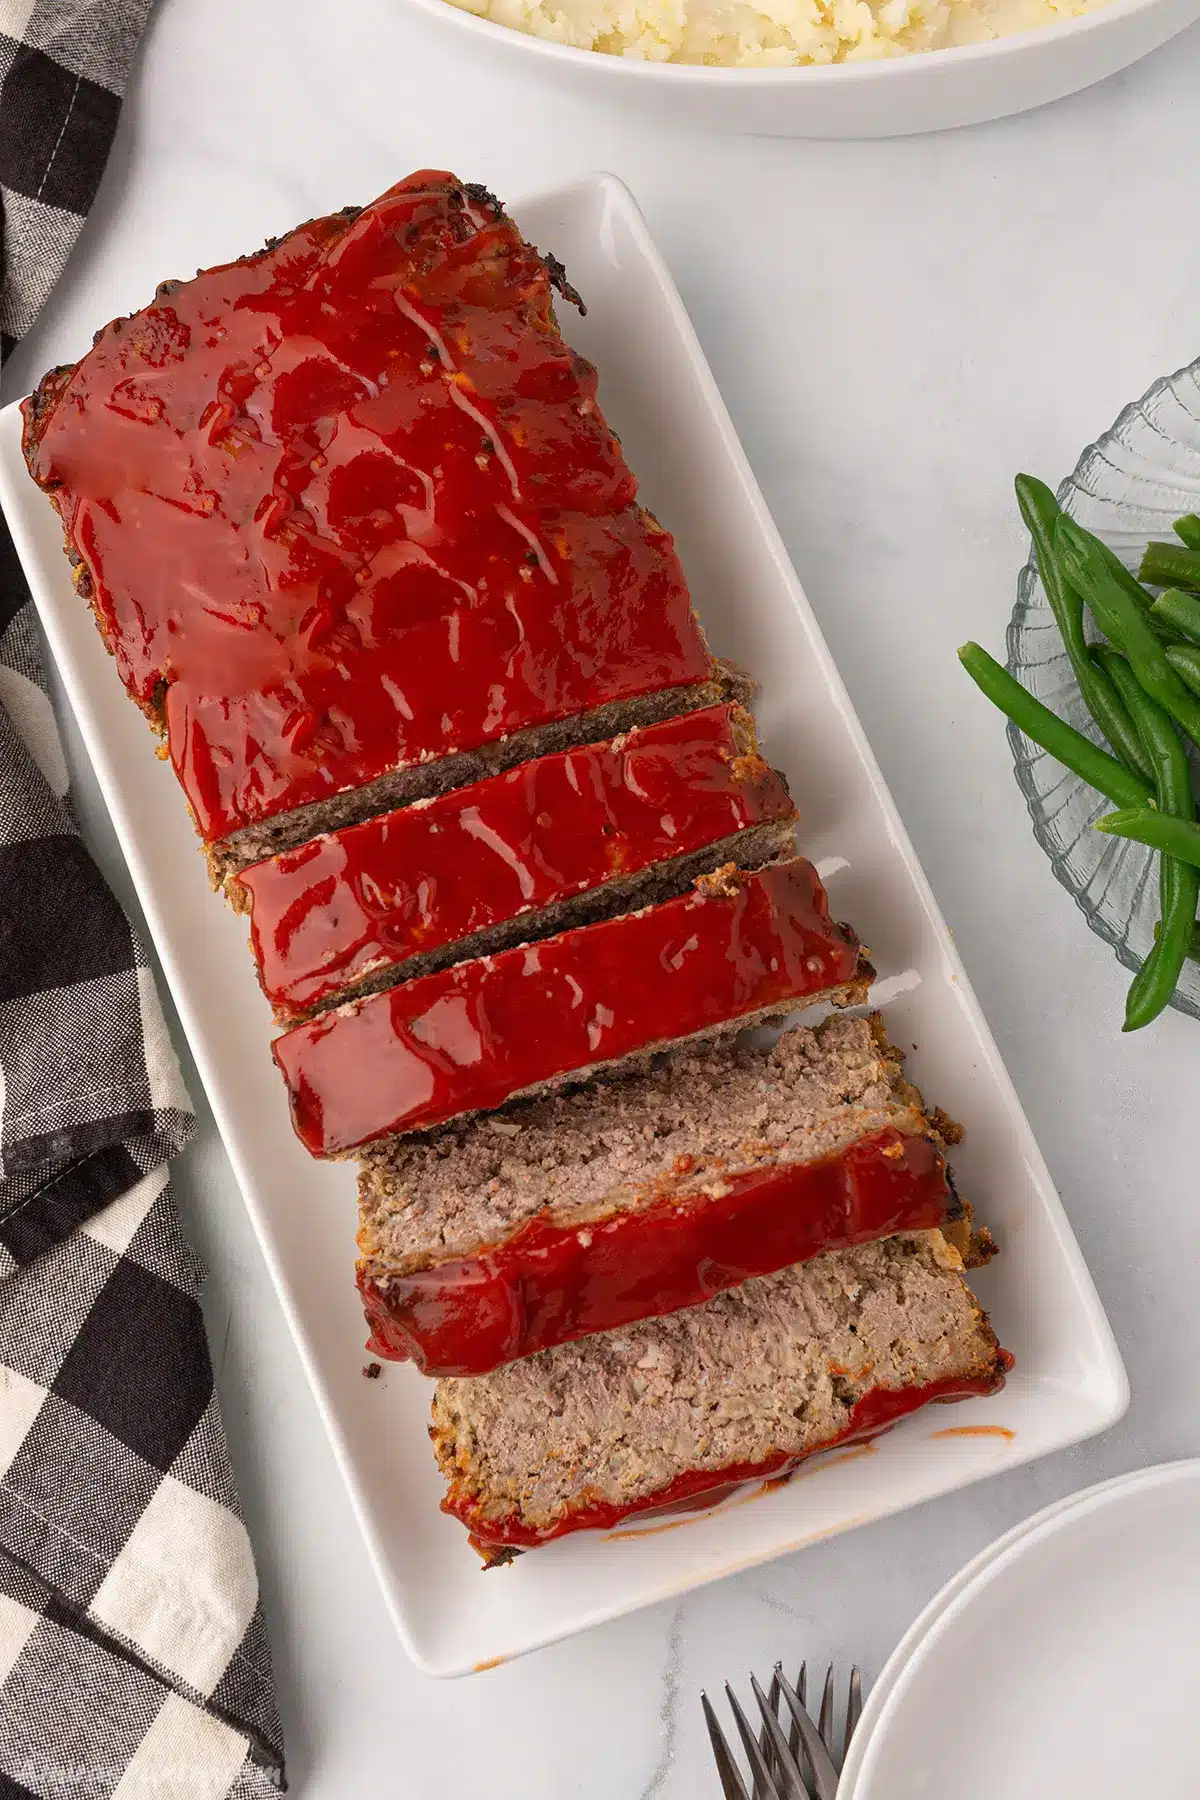 A top view of a meatloaf cut into slices.